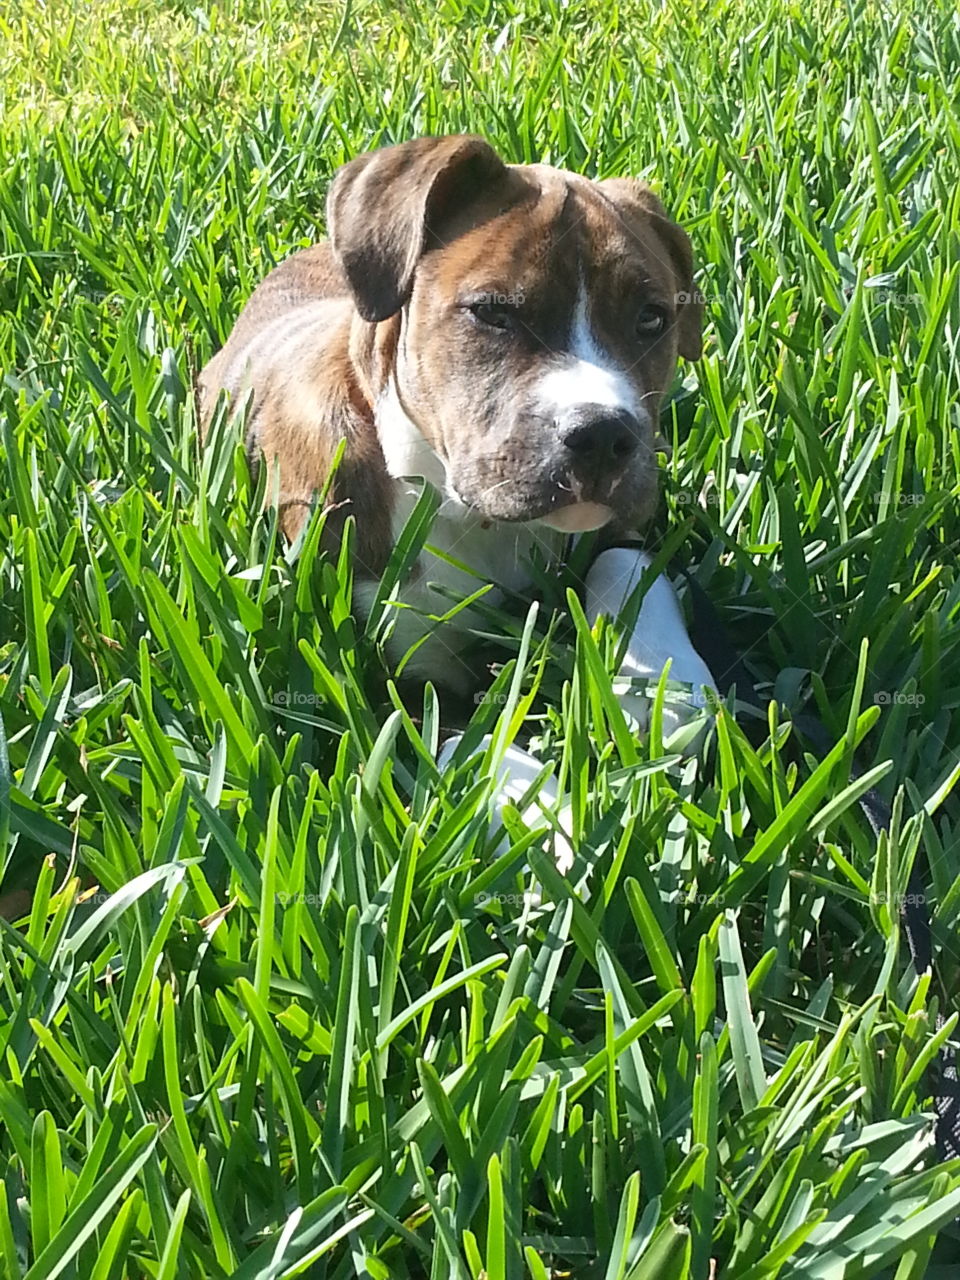 Hank the Tank puppy in the grass